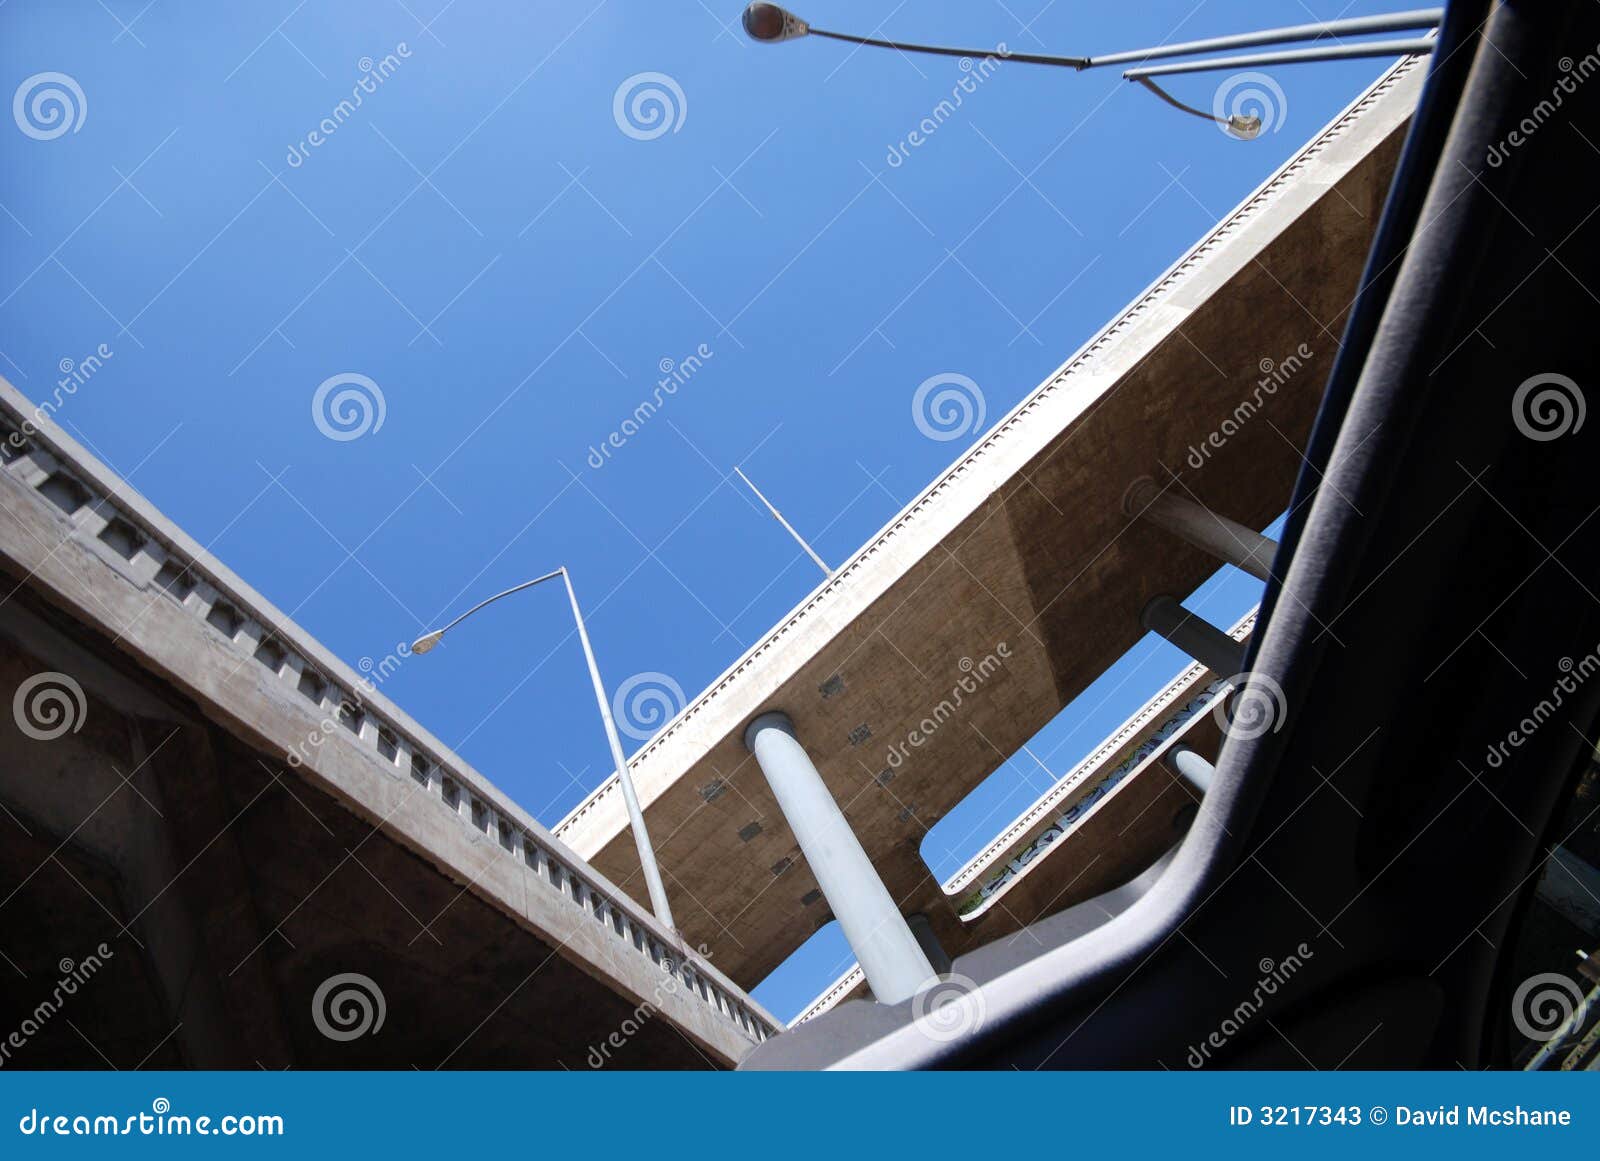 sunroof and overpass